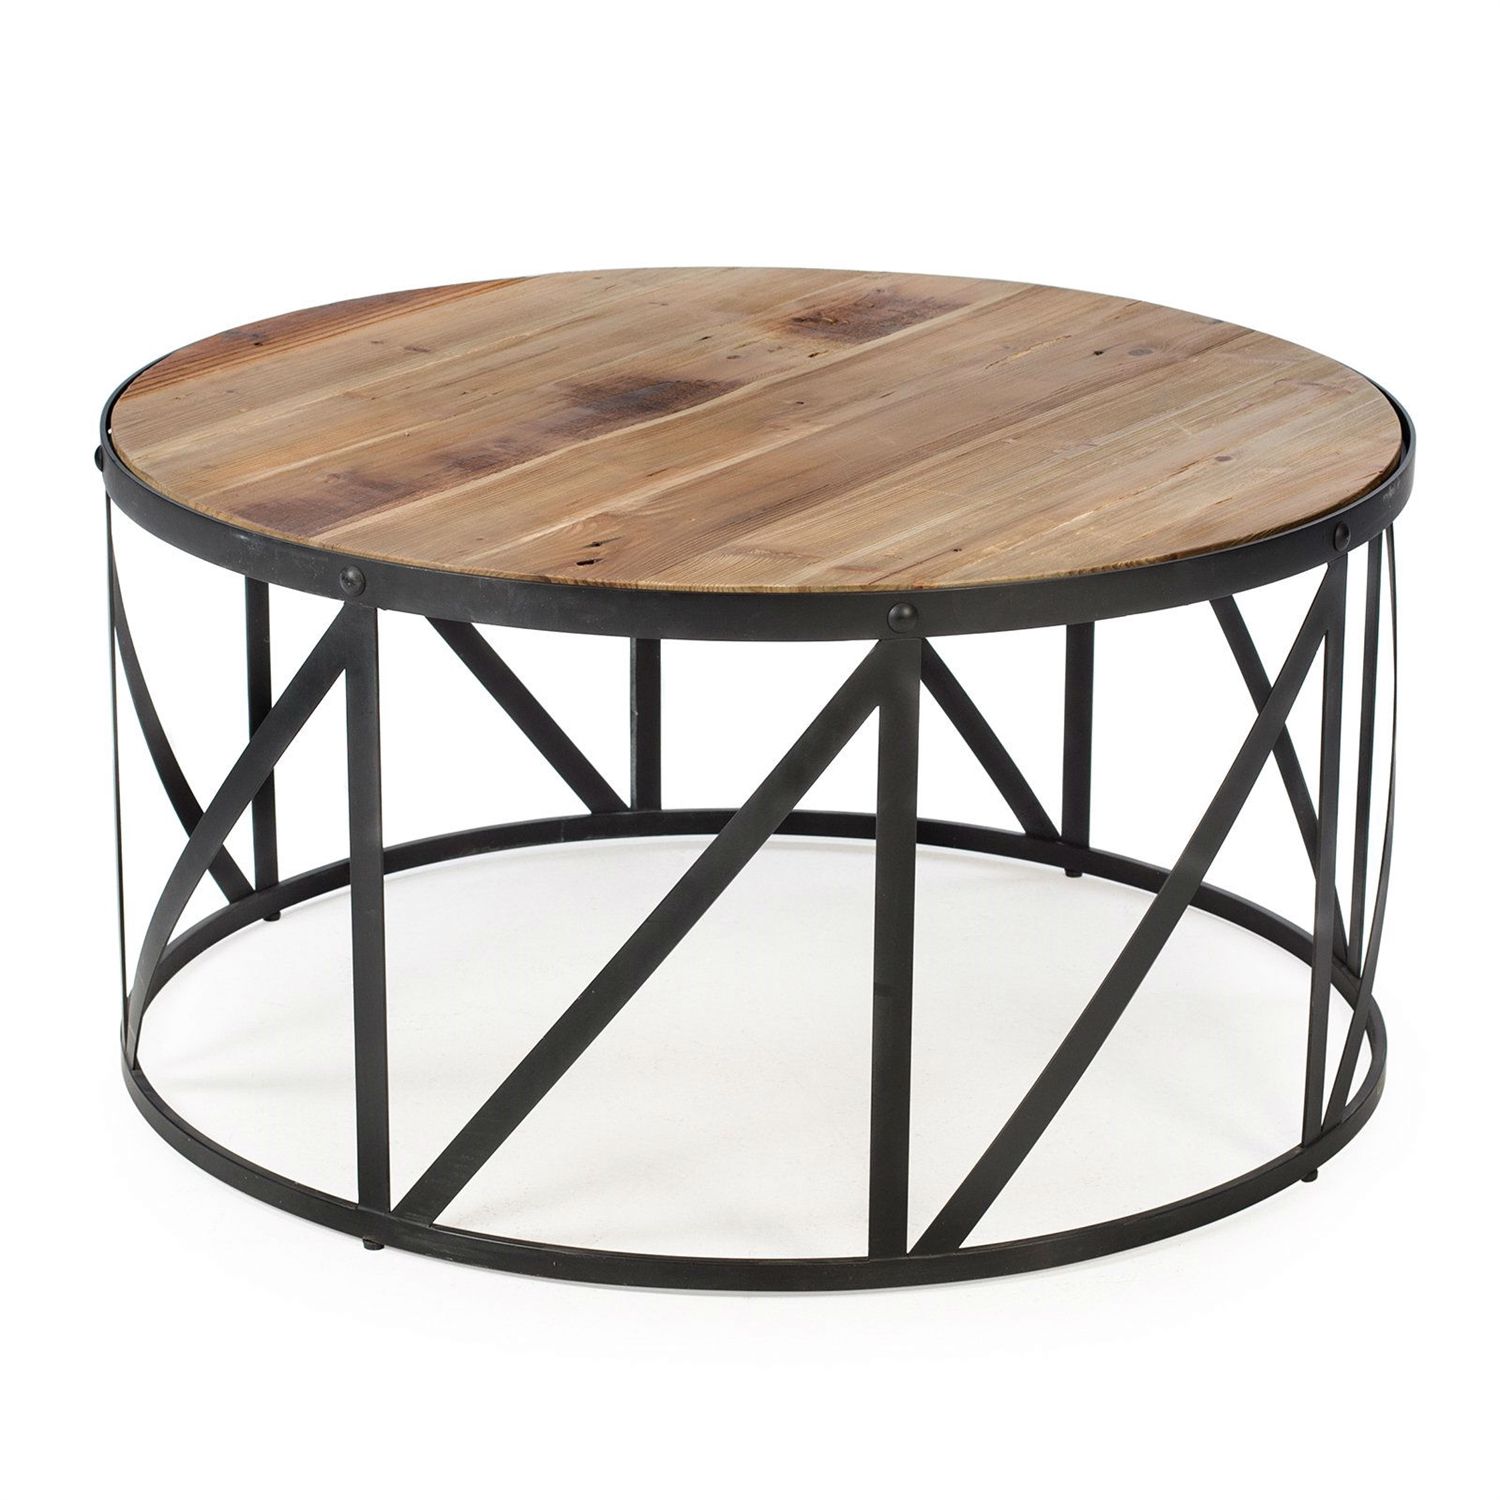 Round Metal And Wood Drum Shaped Coffee Table Pertaining To Well Known Round Iron Coffee Tables (View 3 of 20)